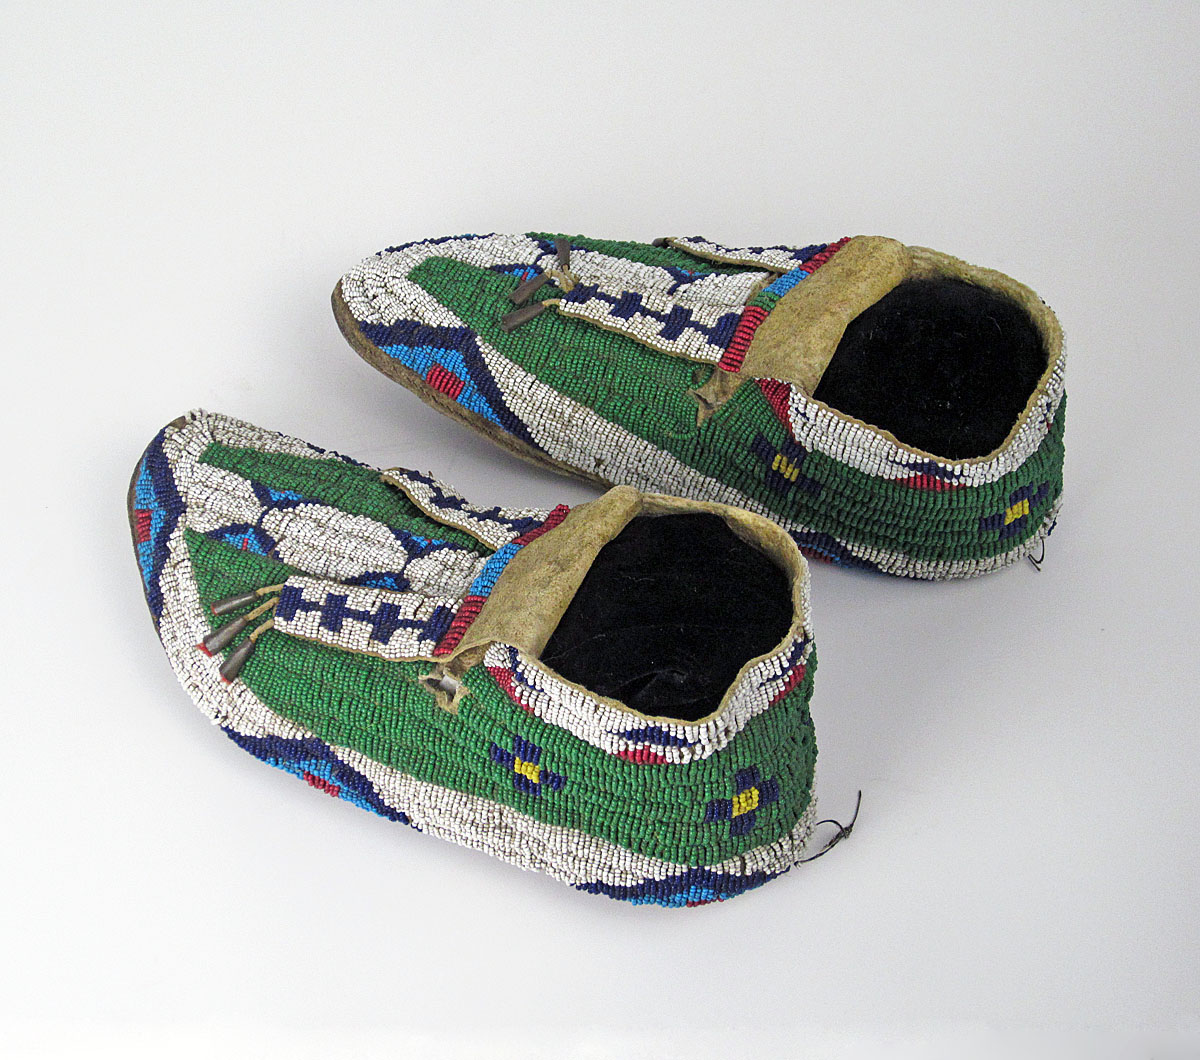 sioux moccasins